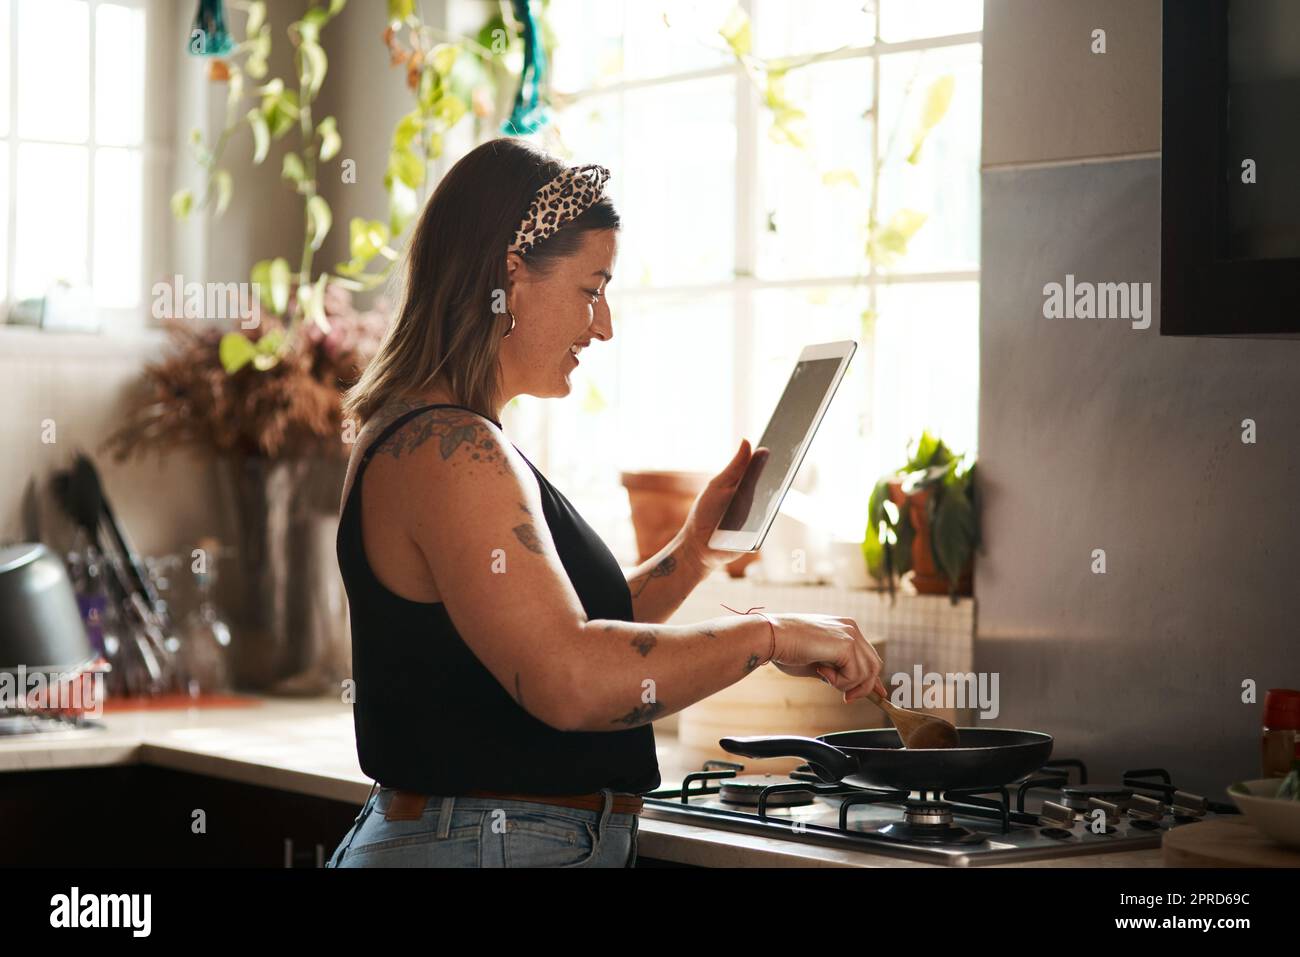 Technology is an awesome cooking tool. a young woman using a digital tablet while preparing a meal at home. Stock Photo